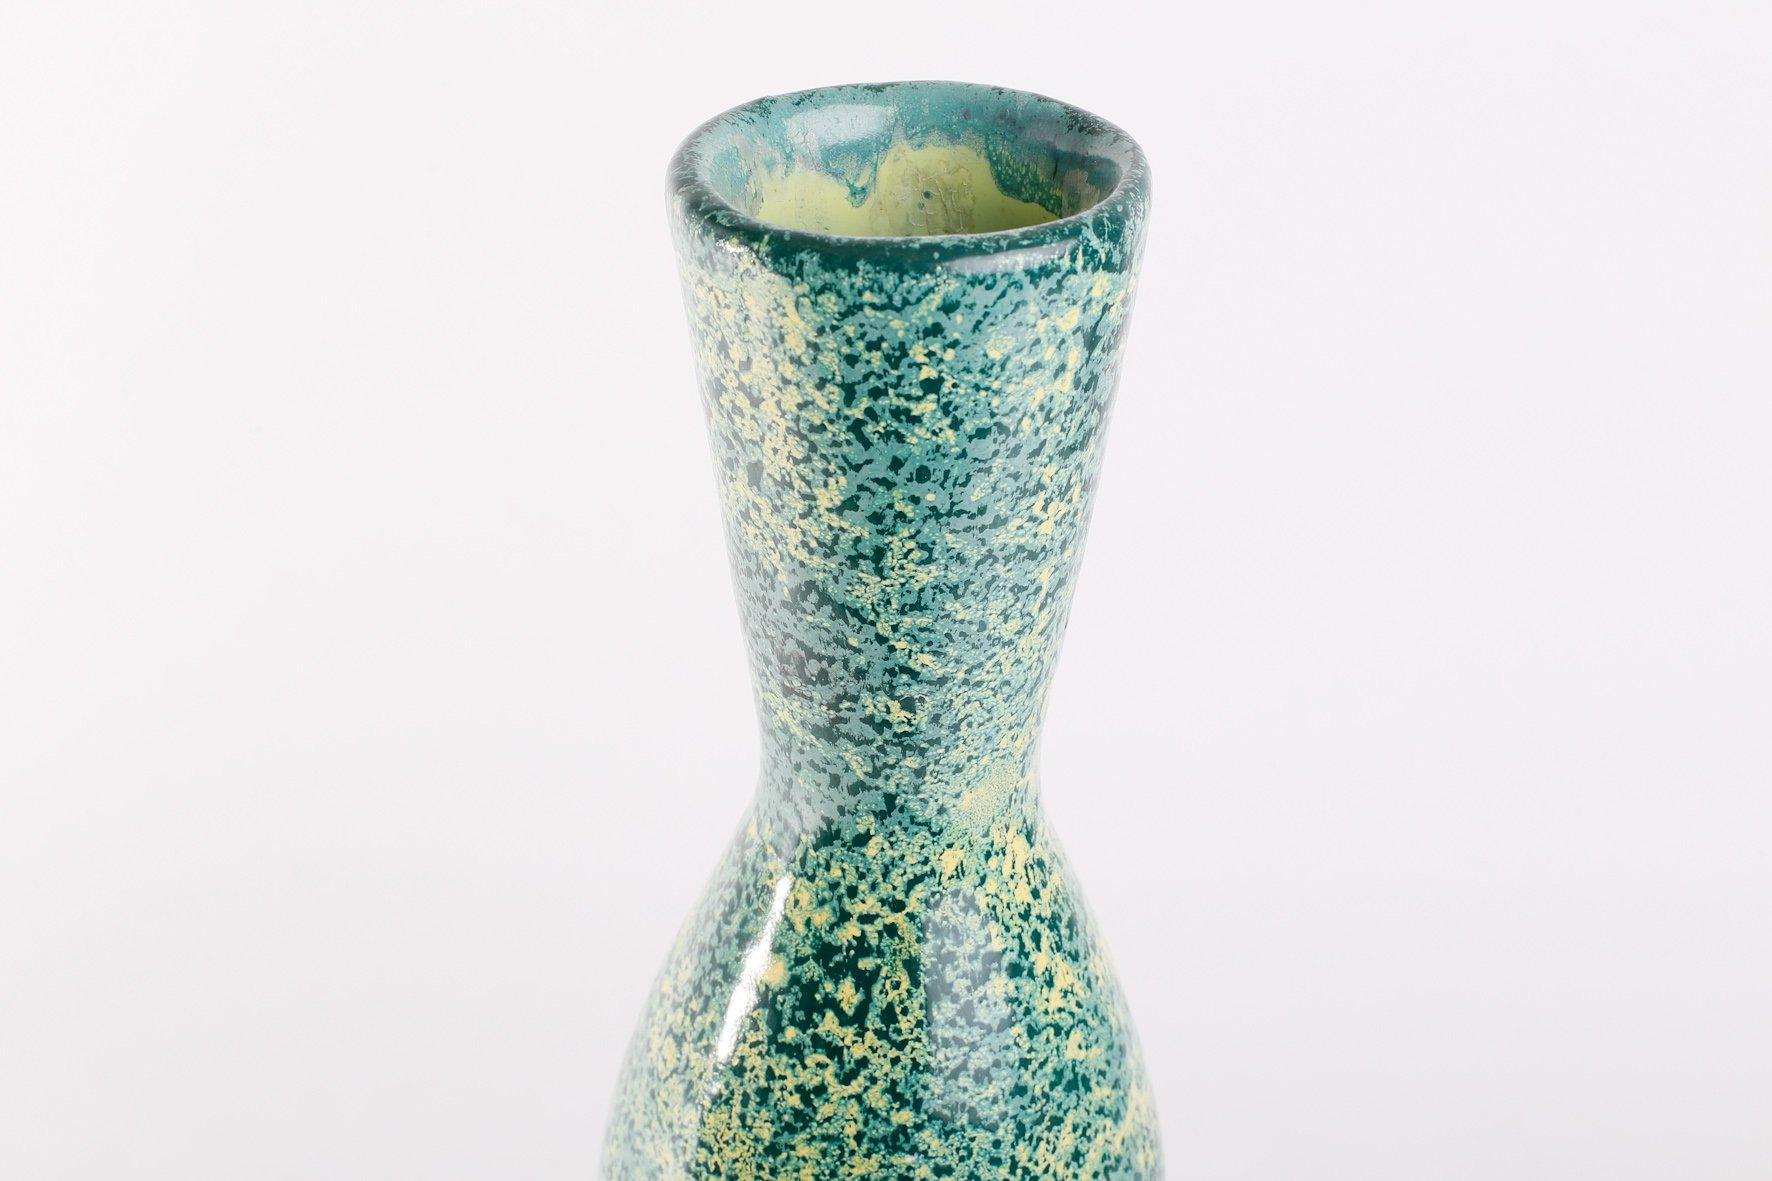 1970s Hungarian ceramic vase, from the 'Tofej' manufactory (Located in Bodrogkeresztur, Hungary)-nice greenish-yellow glaze, paper stamp on the base. Excellent condition.
This piece has an attribution mark such as a manufacturer’s label, a